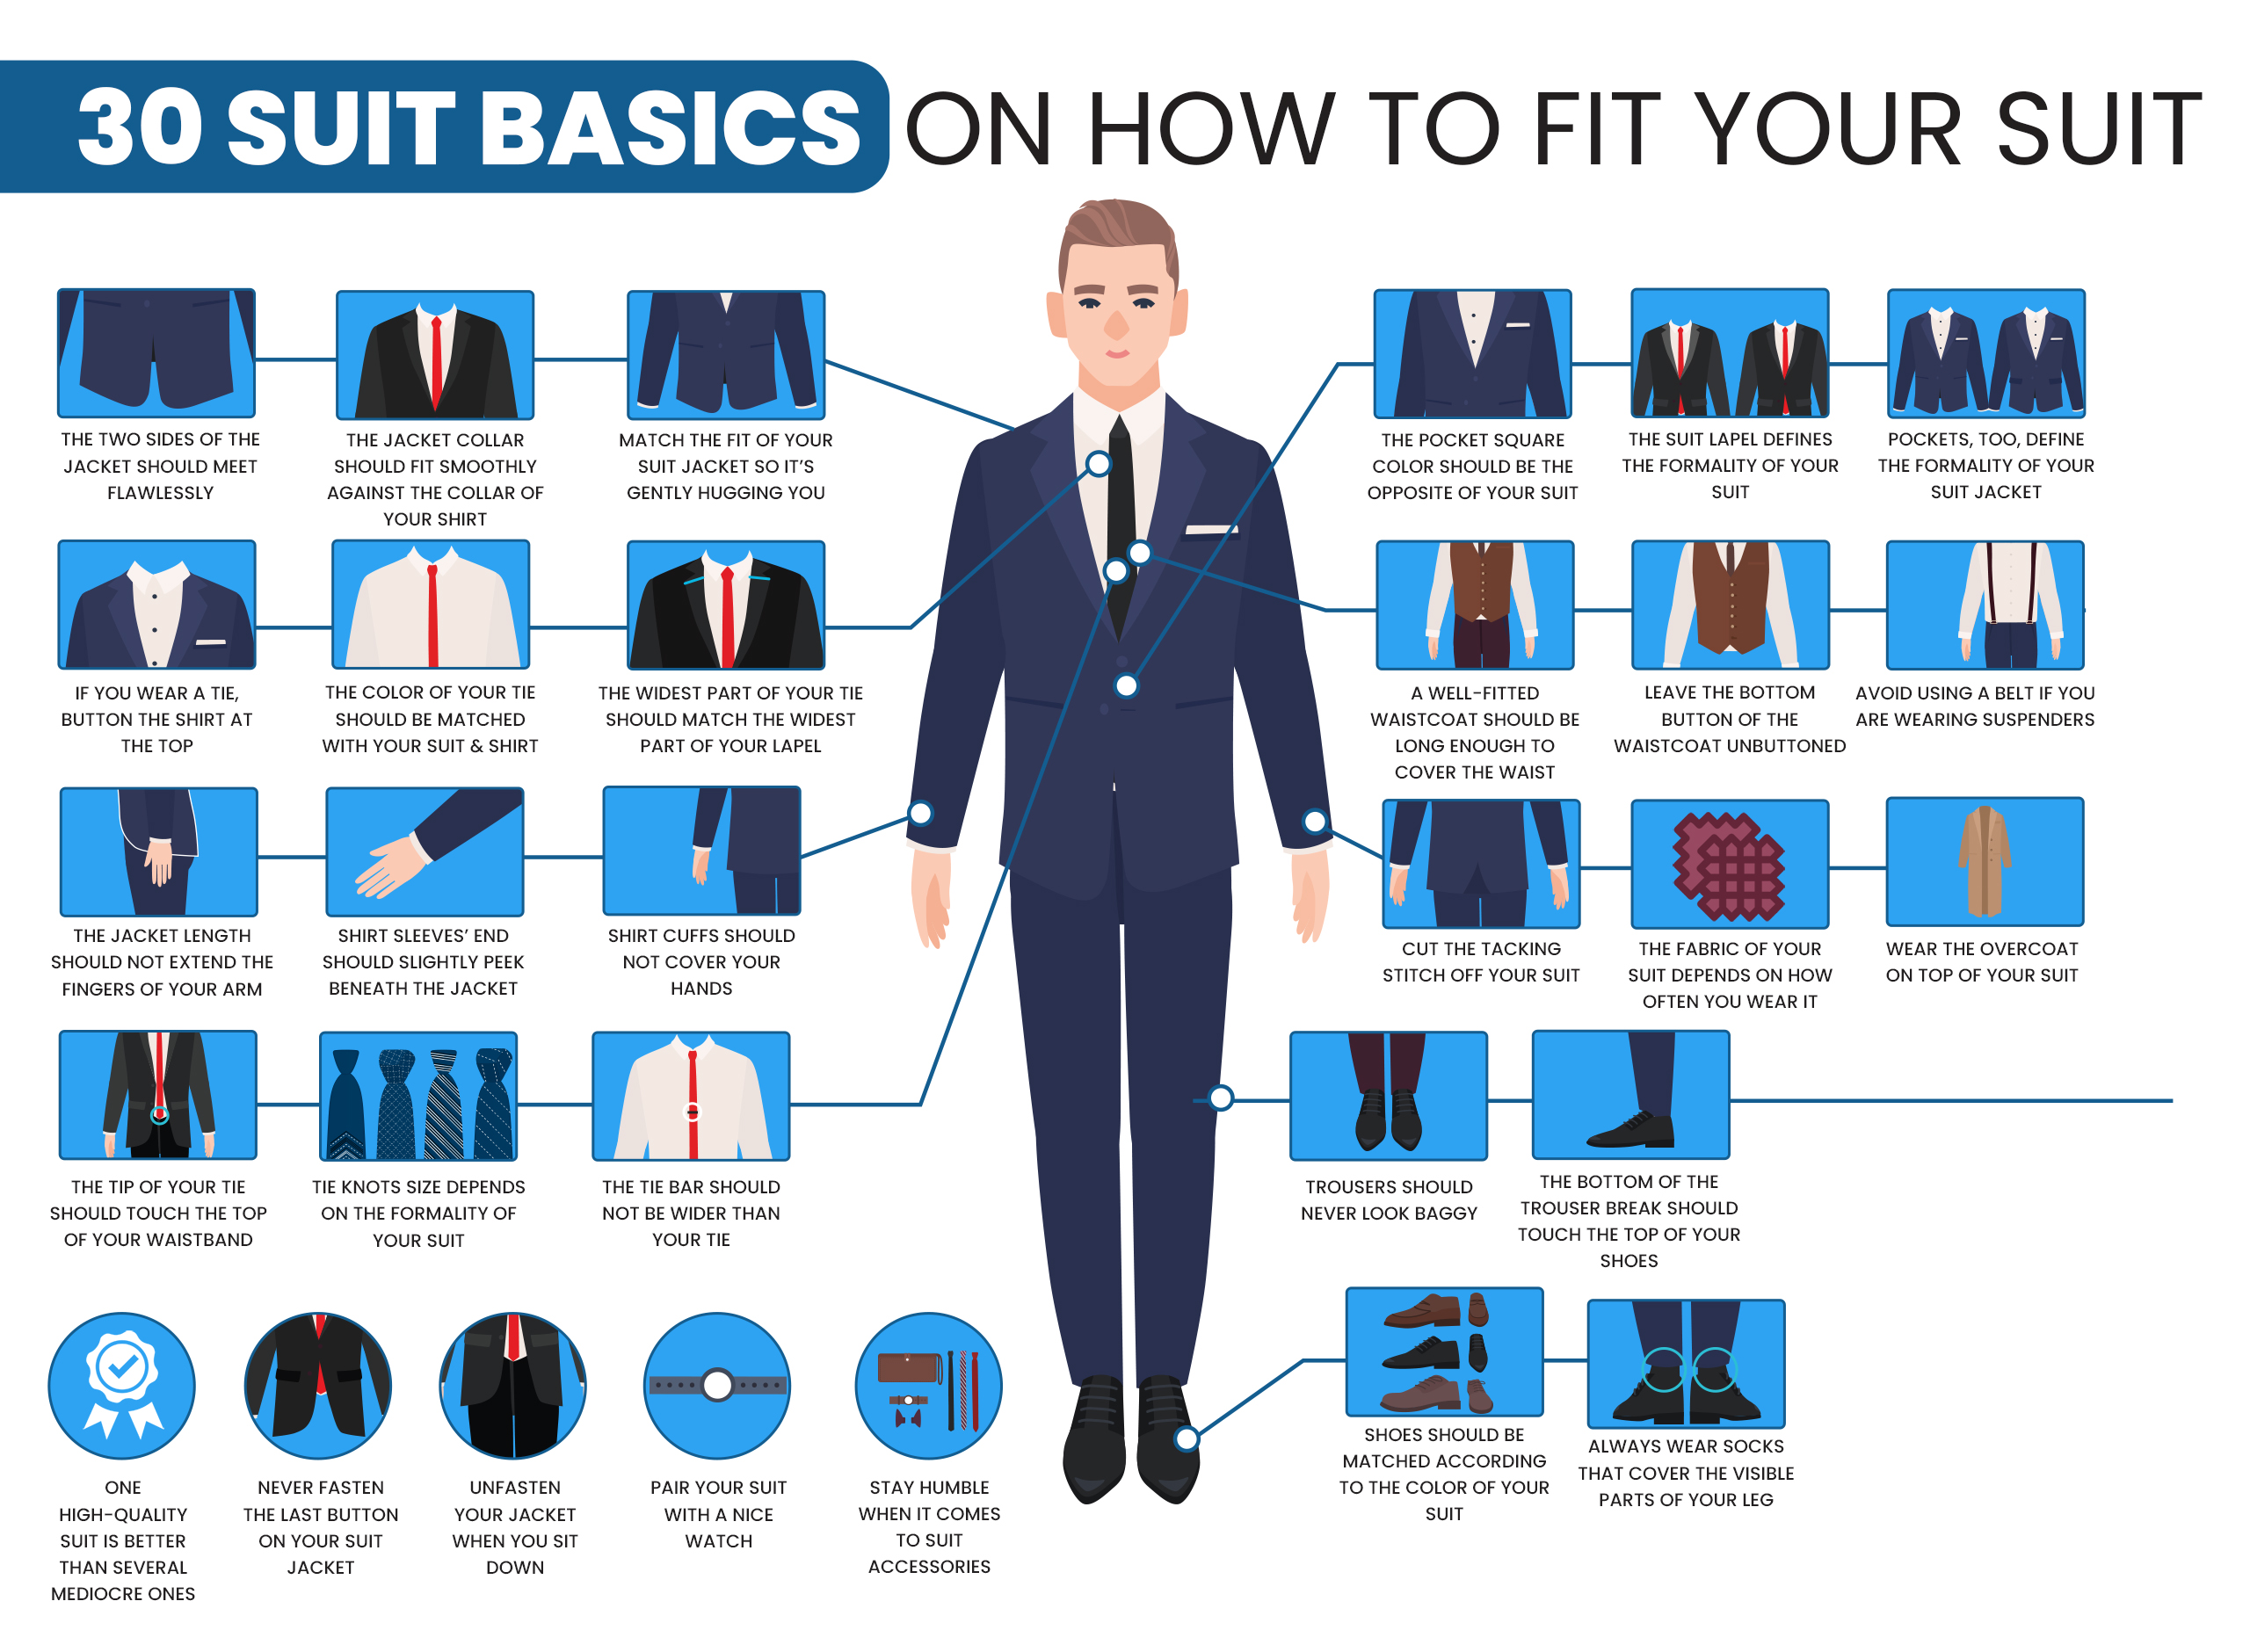 30 suit basics on how to fit and wear a suit